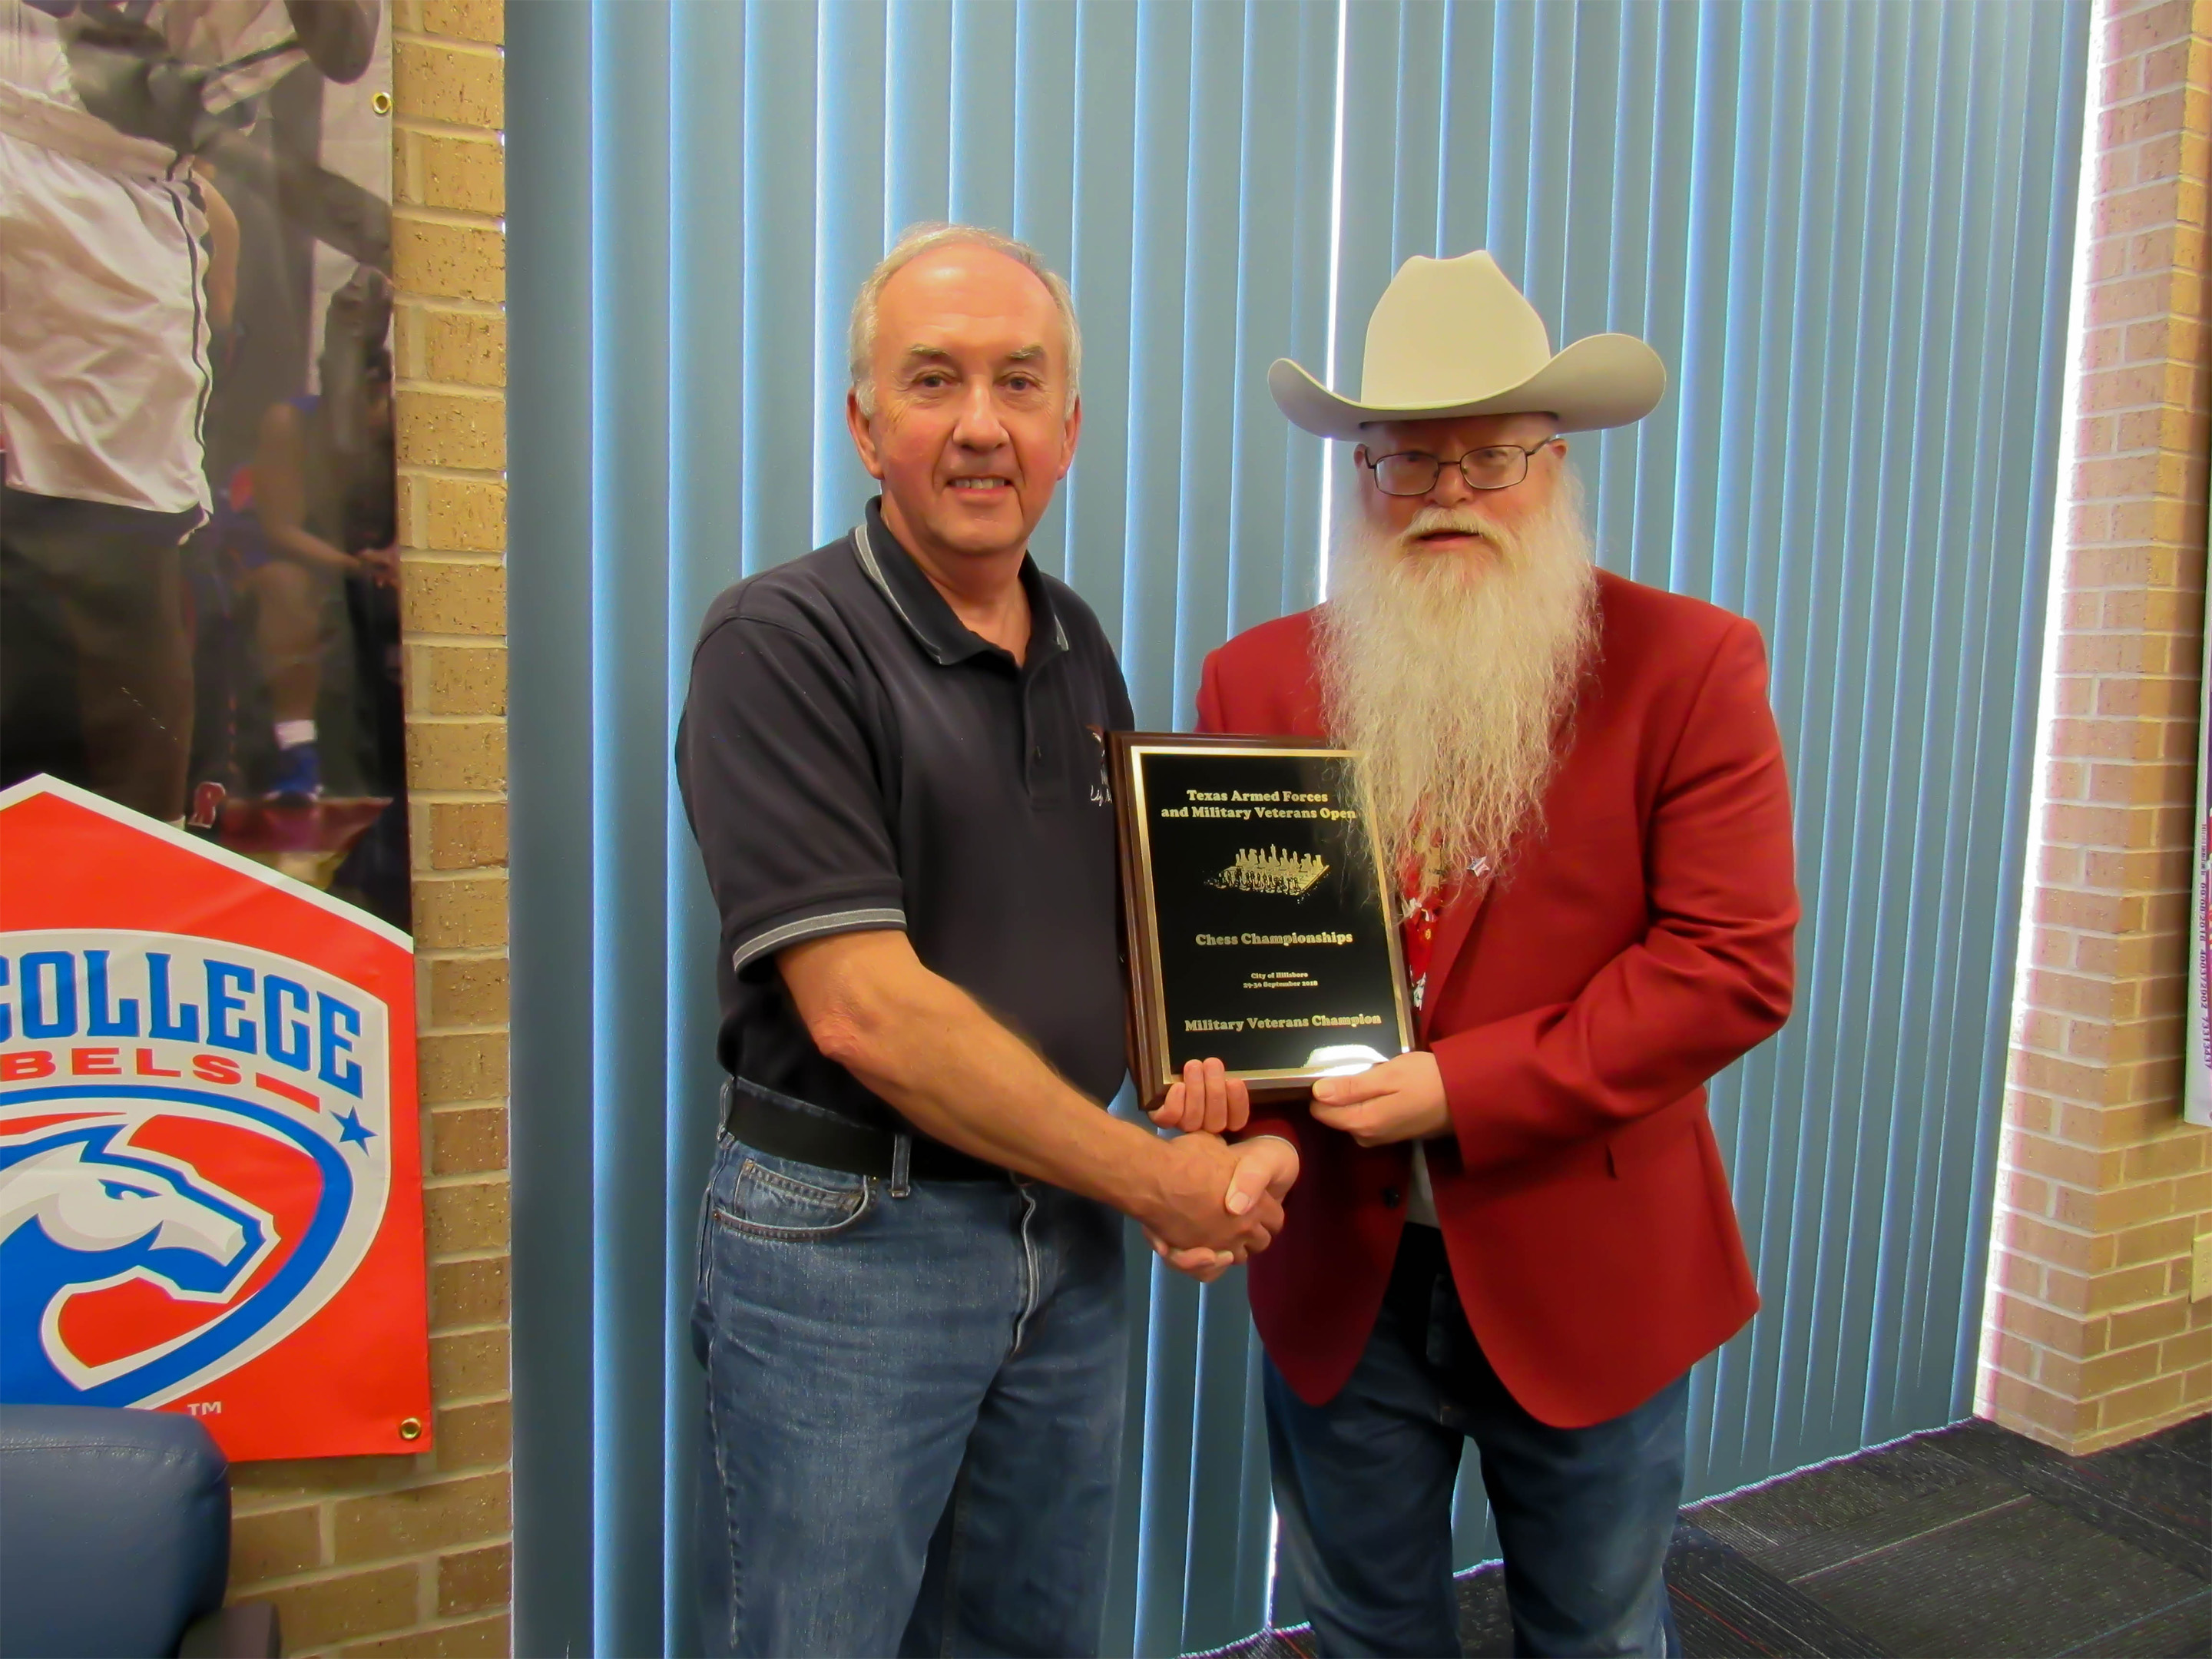 Charles Fricks, from Longview, was top scorer for all Texans with 2.5/4 points.  He achieved a .500 score against three experts including an impressive Round One victory over Oklahoma Armed Forces Champion Neal Naputo.  Sheryl McBroom took this photo showing Chief Organizer Jim Hollingsworth (red jacket) presenting the award and title of Texas Military Veterans Champion to Charles Fricks.